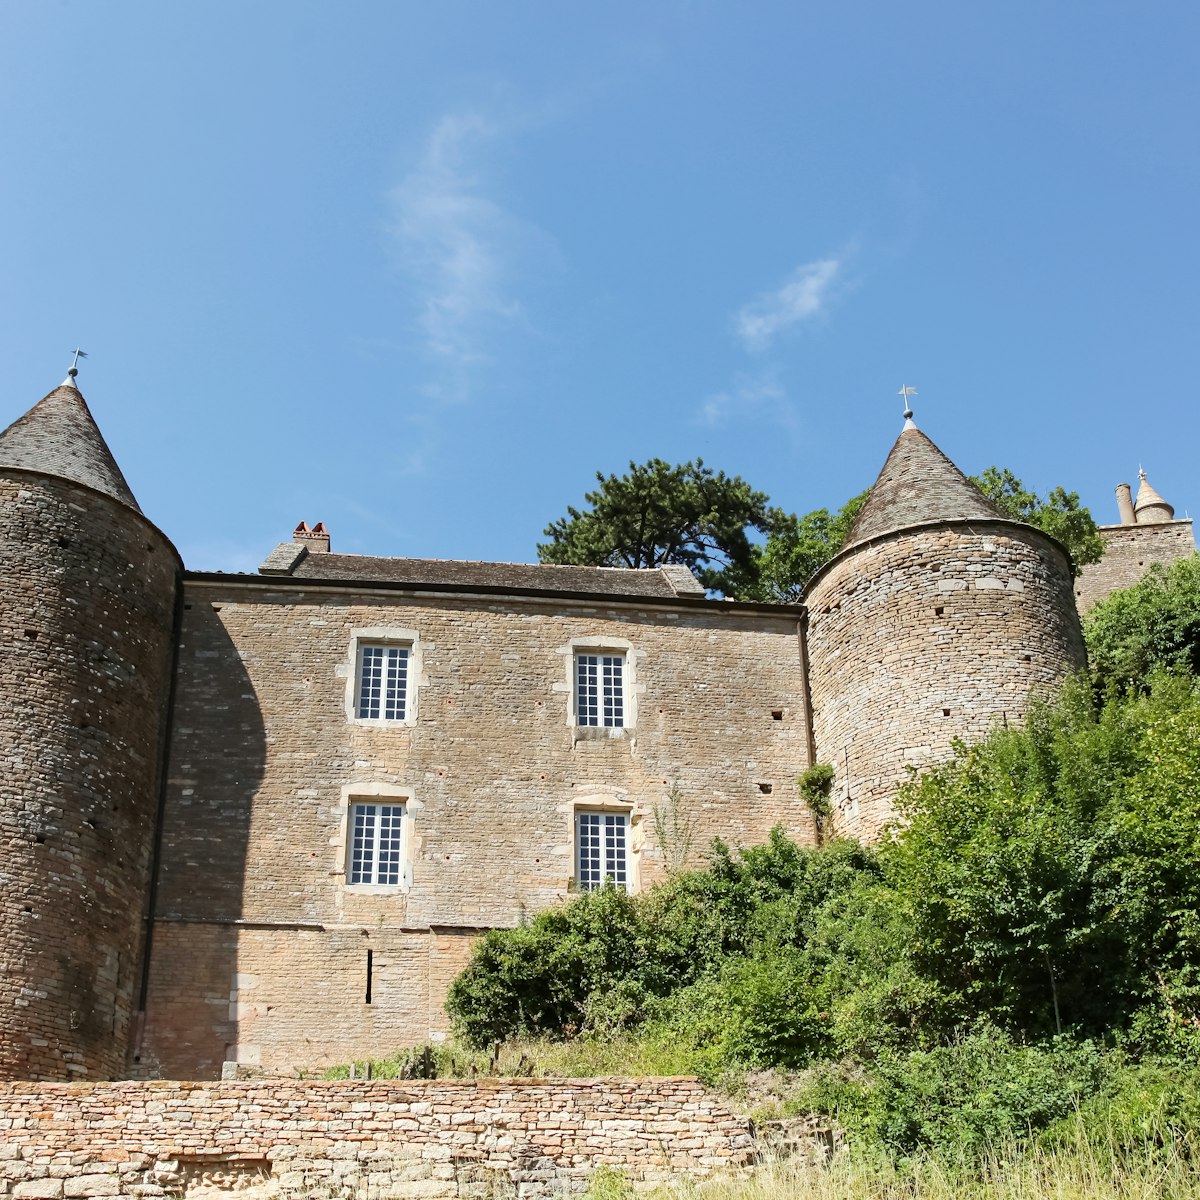 The castle of Brancion in Burgundy, France.